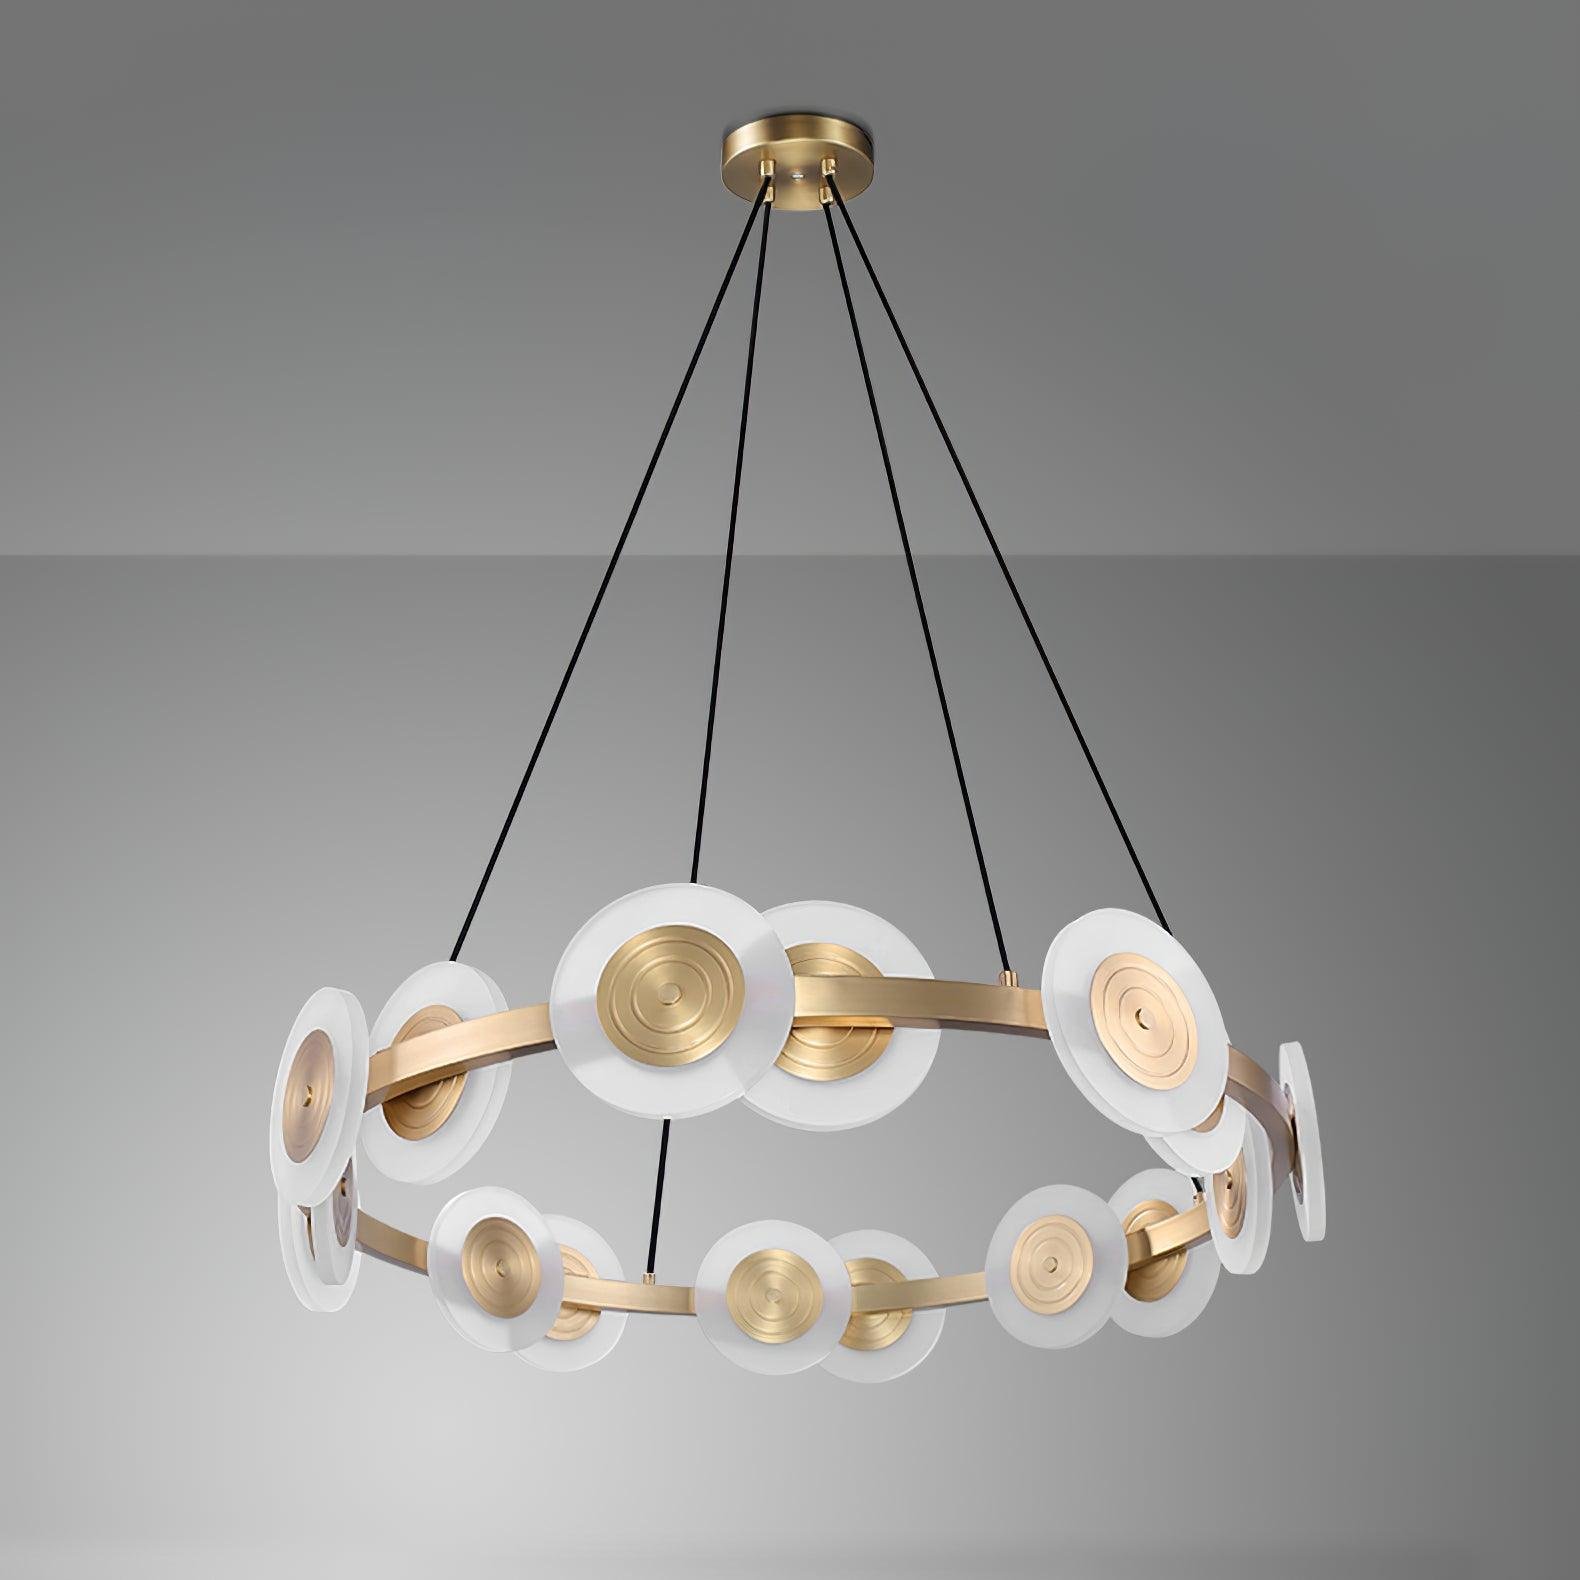 Nordic Chandelier by Samiya with 16 Heads, Brass and White Finish, Cool Light, Diameter 36.2" x Height 6.7" (92cm x 17cm)